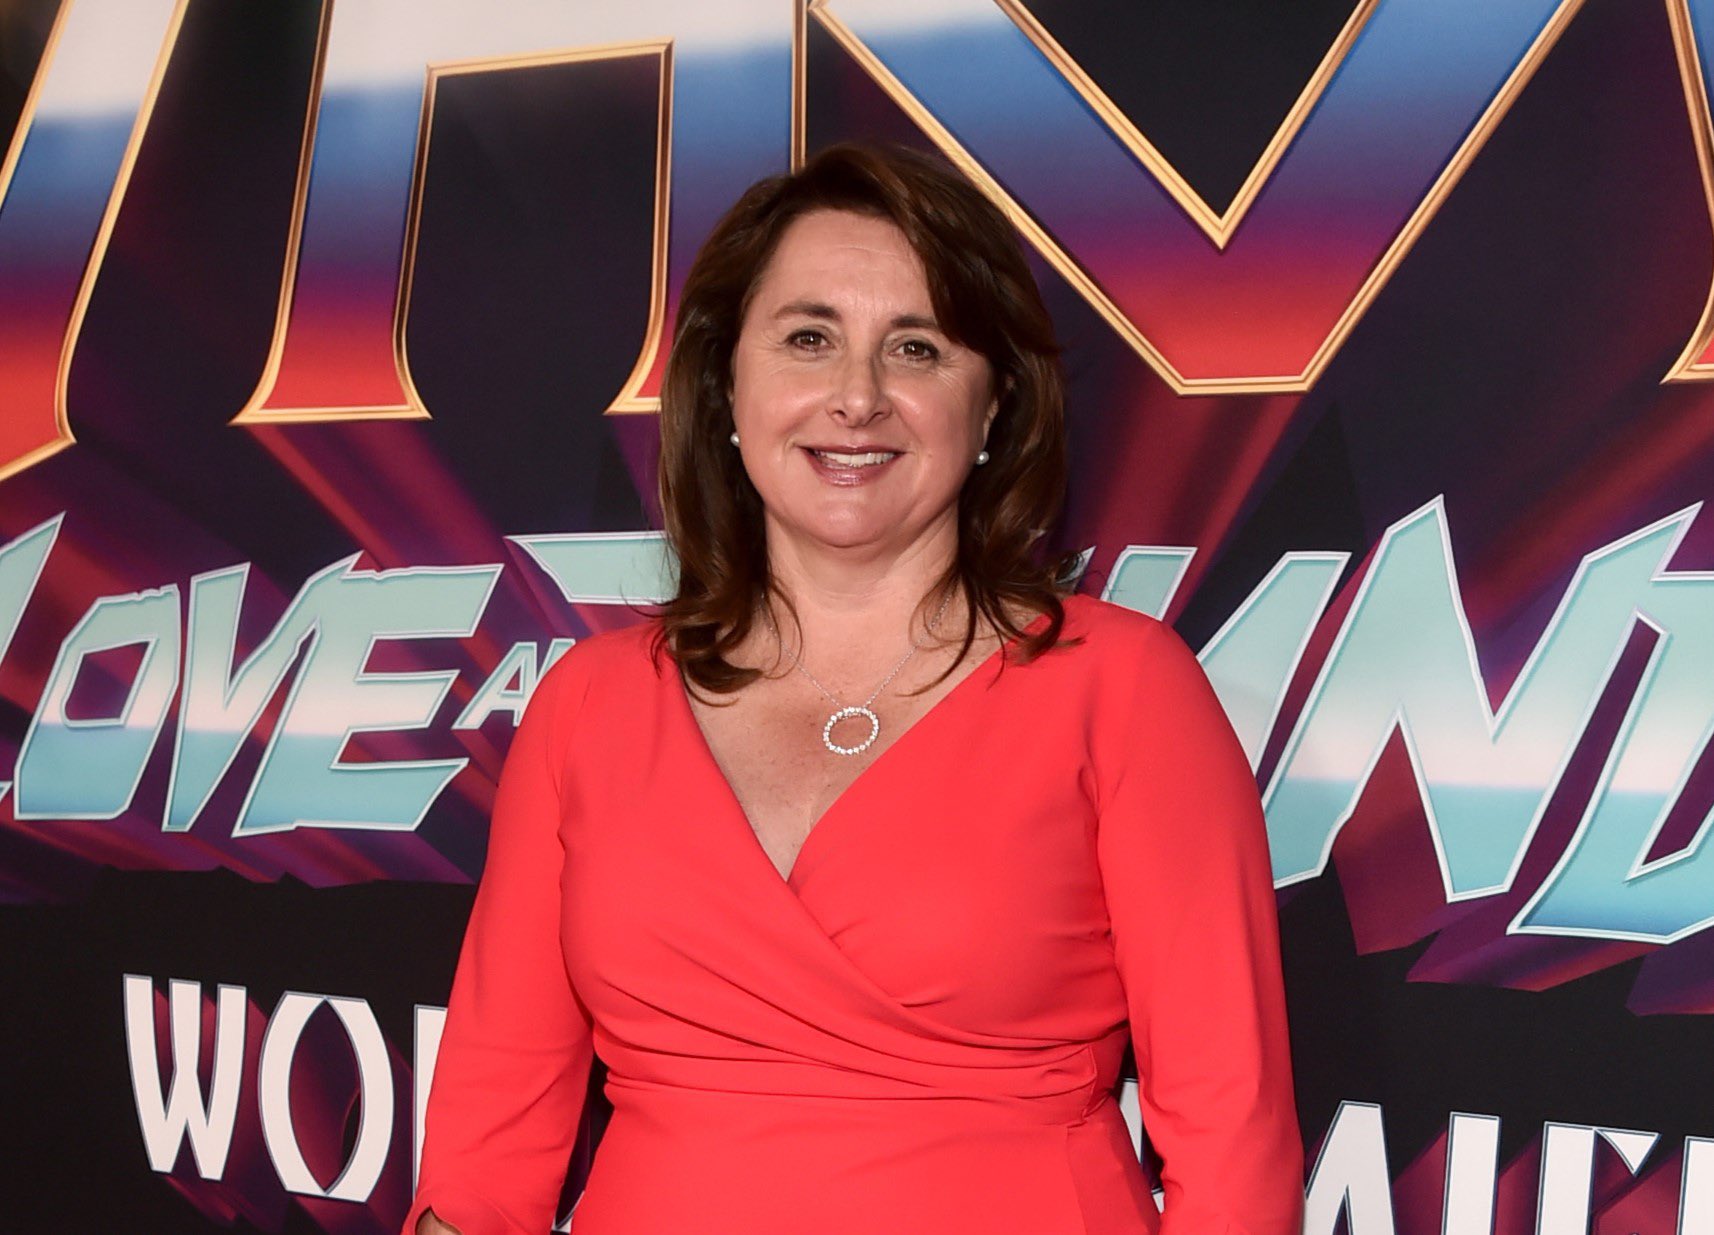 DiscussingFilm on Twitter: "Victoria Alonso has left Marvel Studios. She was President of Physical, Post Production, VFX and Animation at the studio. (Source: https://t.co/qMIxBVsHgK) https://t.co/mJvILJdS1V" / Twitter